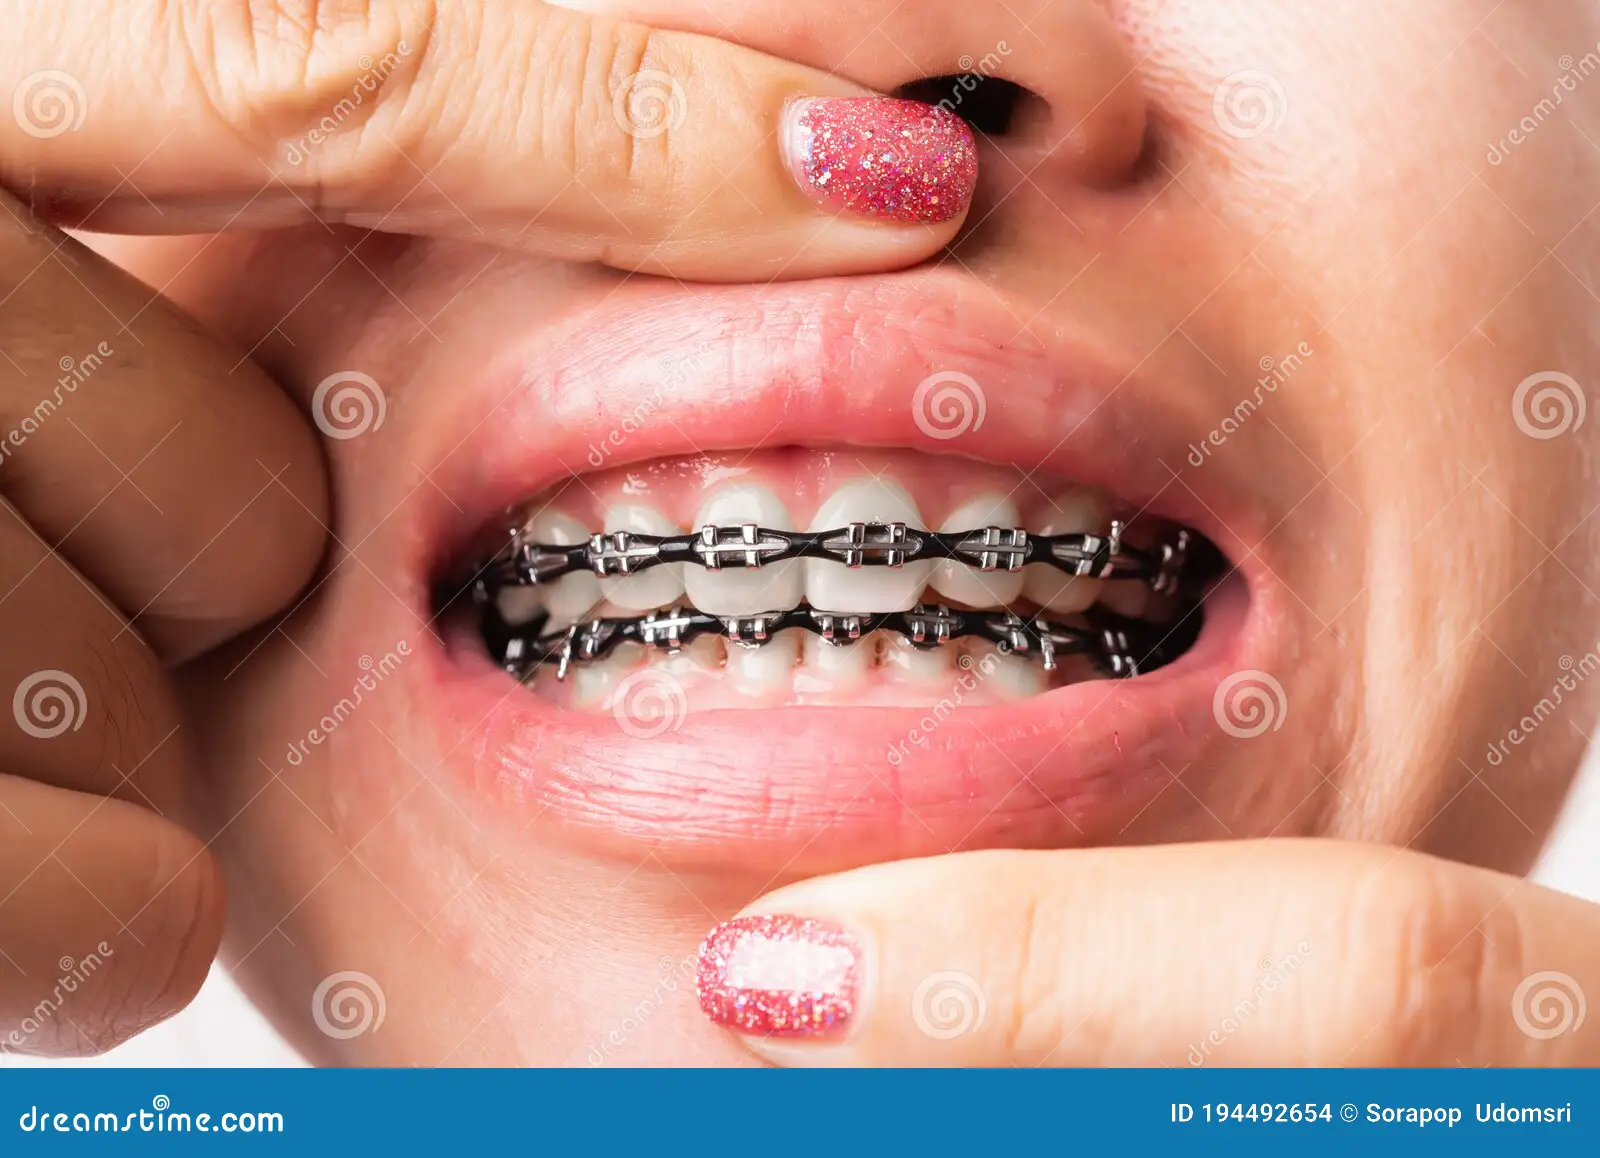 Black Braces: A Comprehensive Guide to Modern Orthodontic Treatment